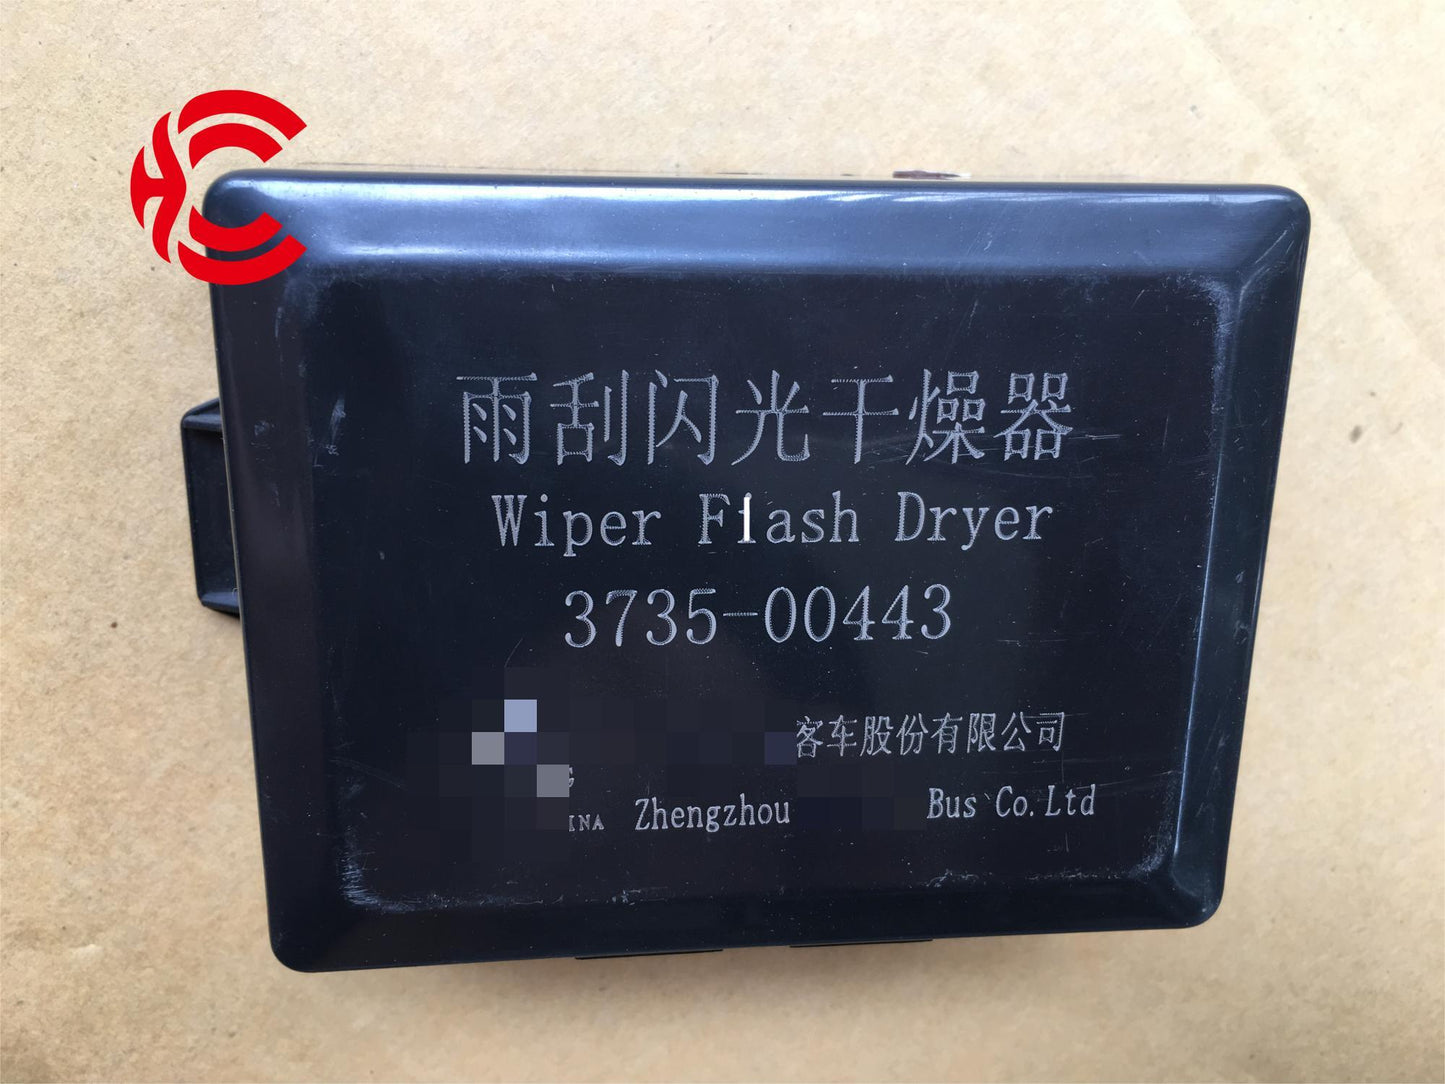 OEM: 3735-00443Material: ABS Color: black Origin: Made in ChinaWeight: 150gPacking List: 1* Wiper Flash Dryer More ServiceWe can provide OEM Manufacturing serviceWe can Be your one-step solution for Auto PartsWe can provide technical scheme for you Feel Free to Contact Us, We will get back to you as soon as possible.